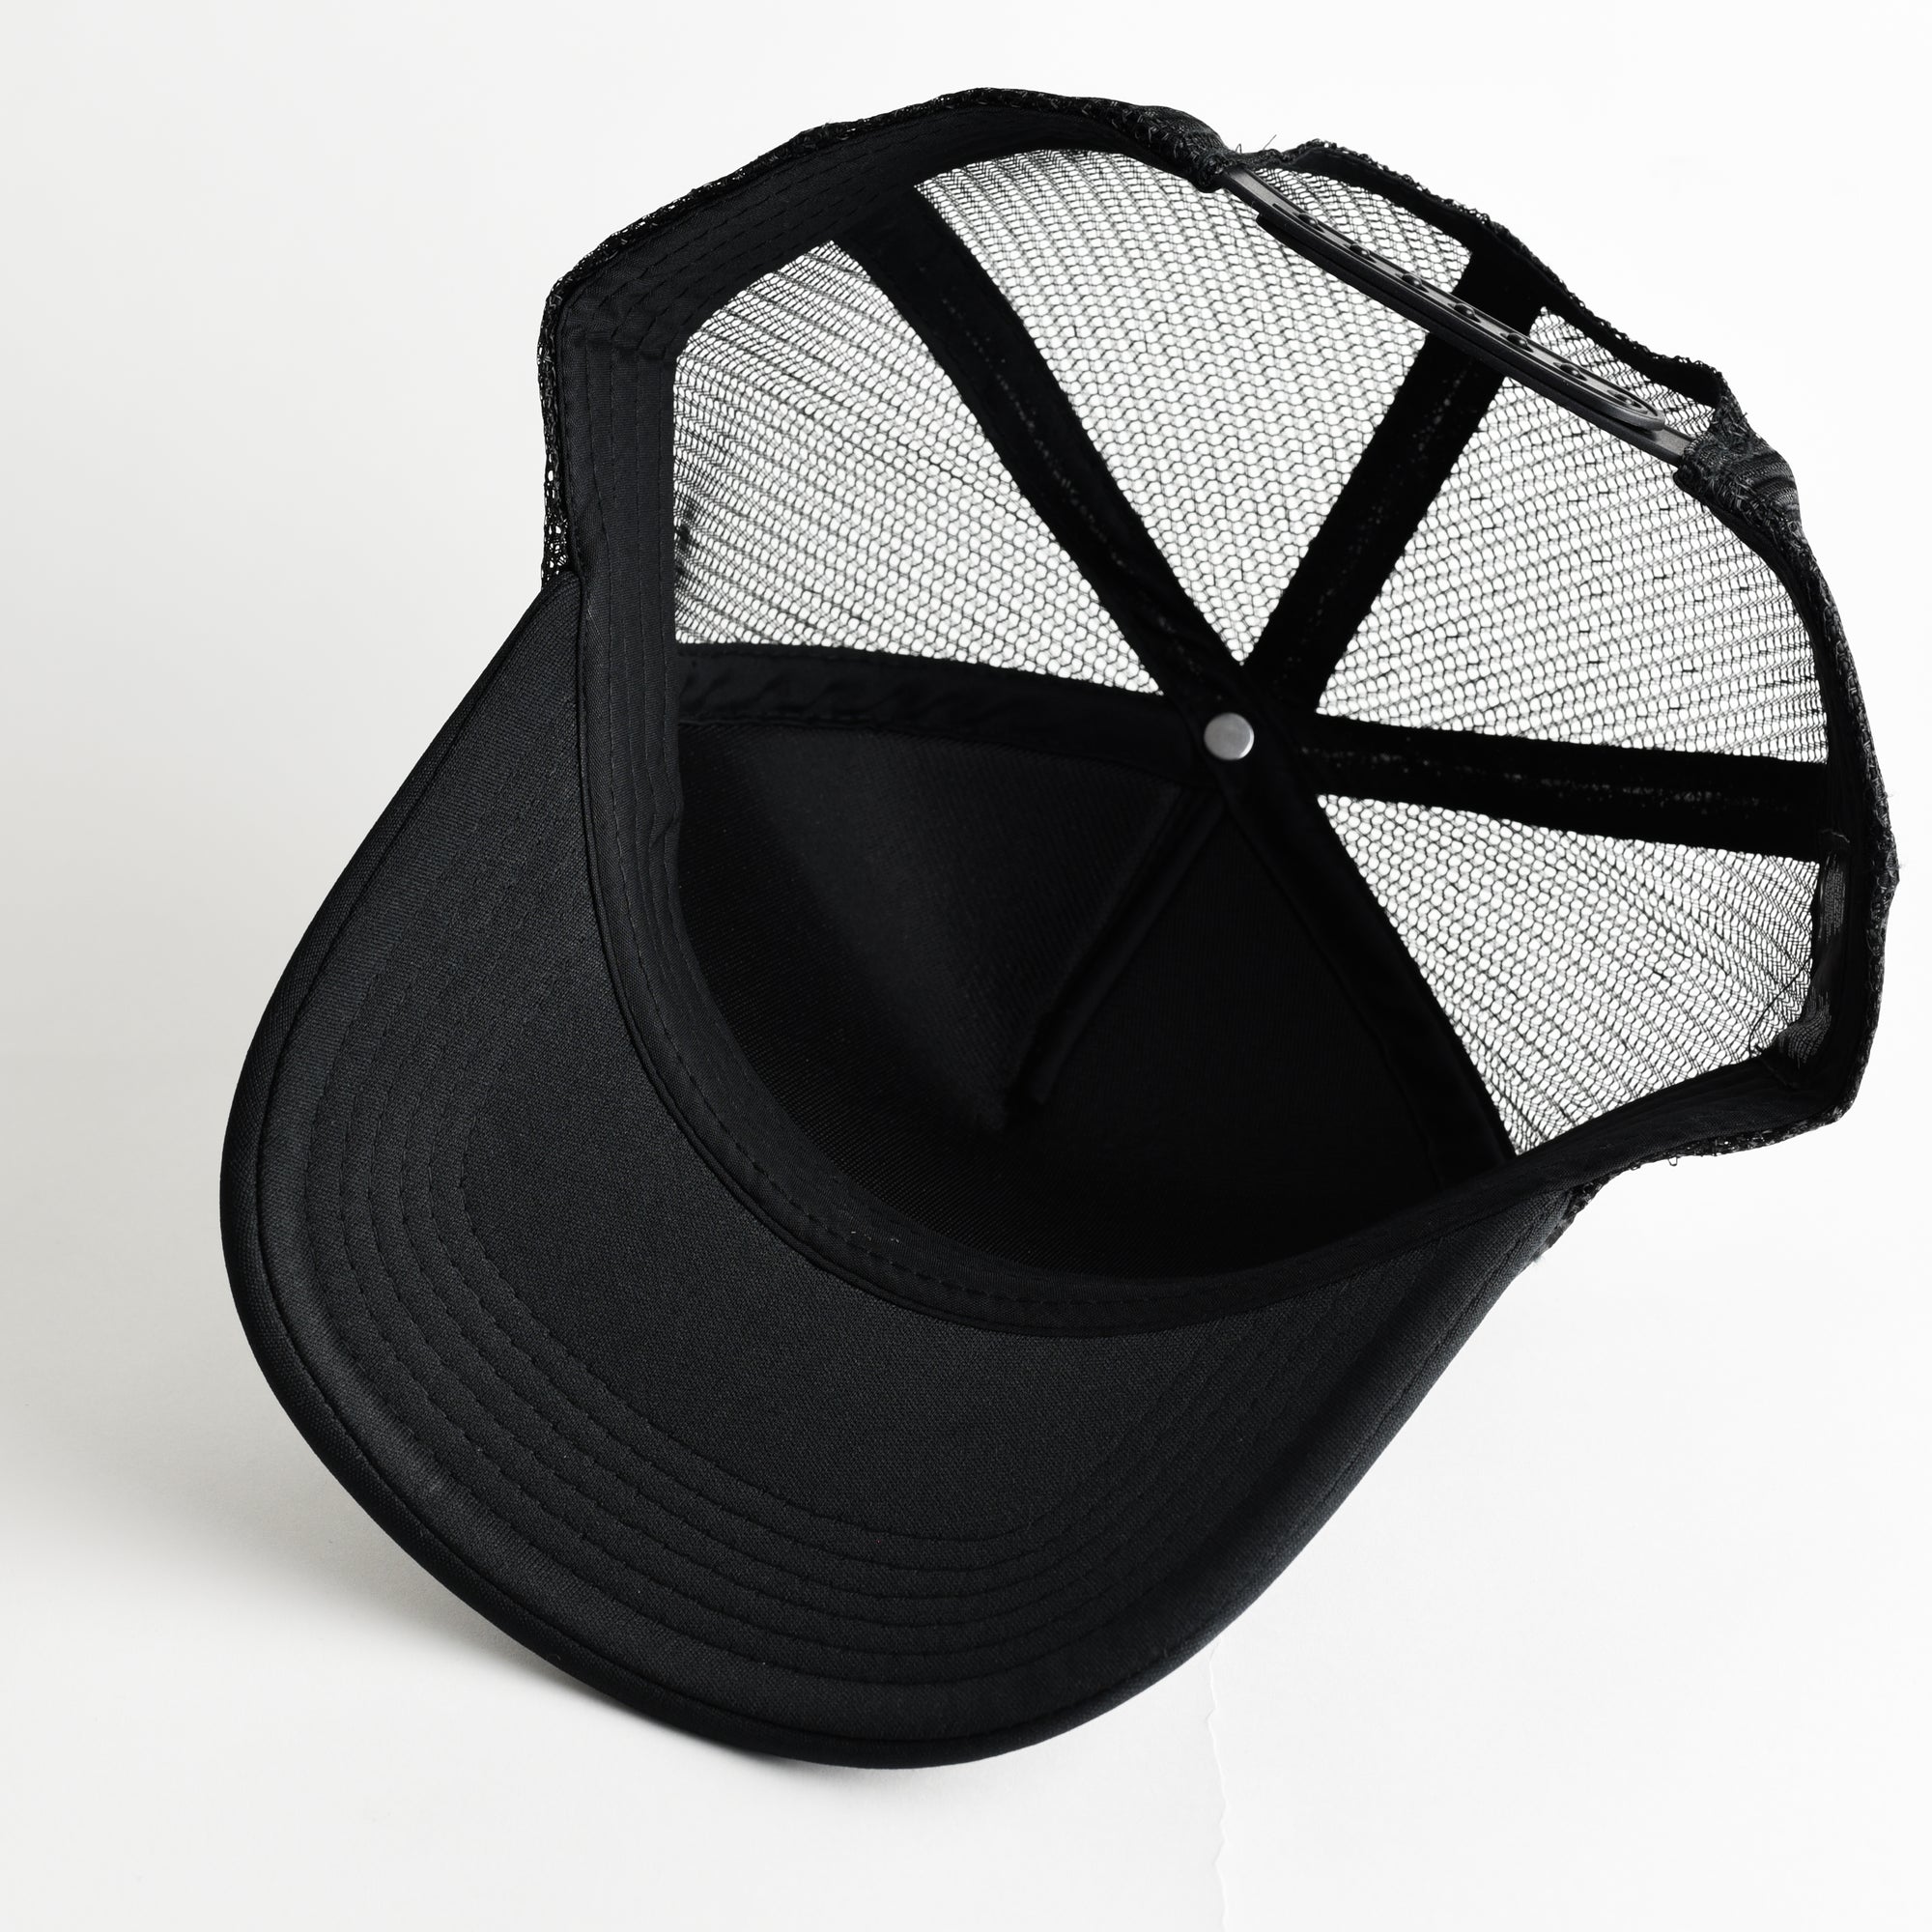 Mountain Time Recycled Trucker Hat - black